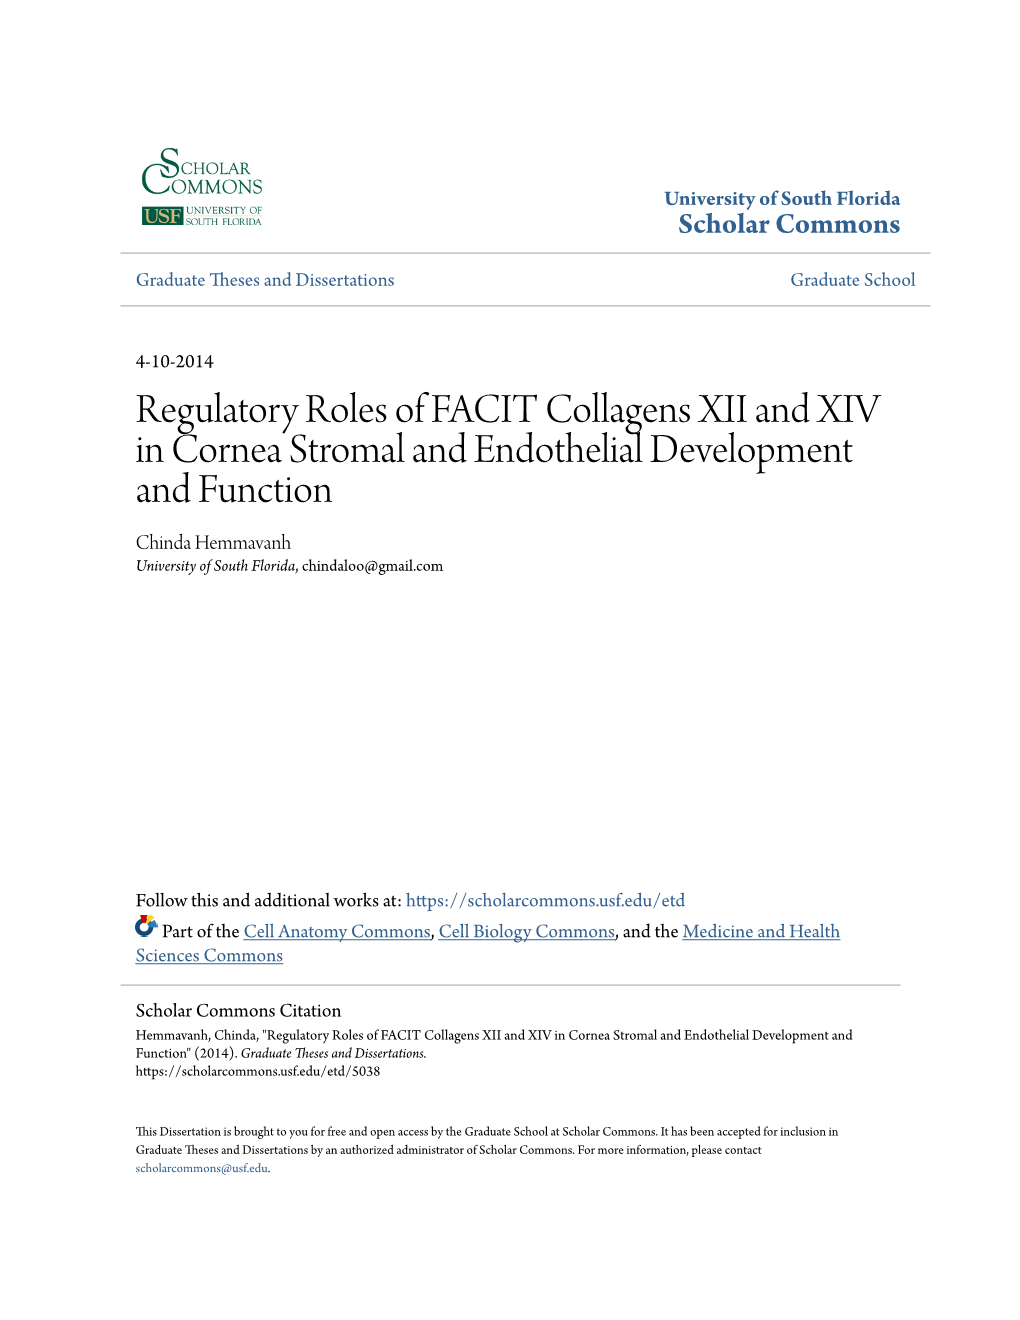 Regulatory Roles of FACIT Collagens XII and XIV in Cornea Stromal And